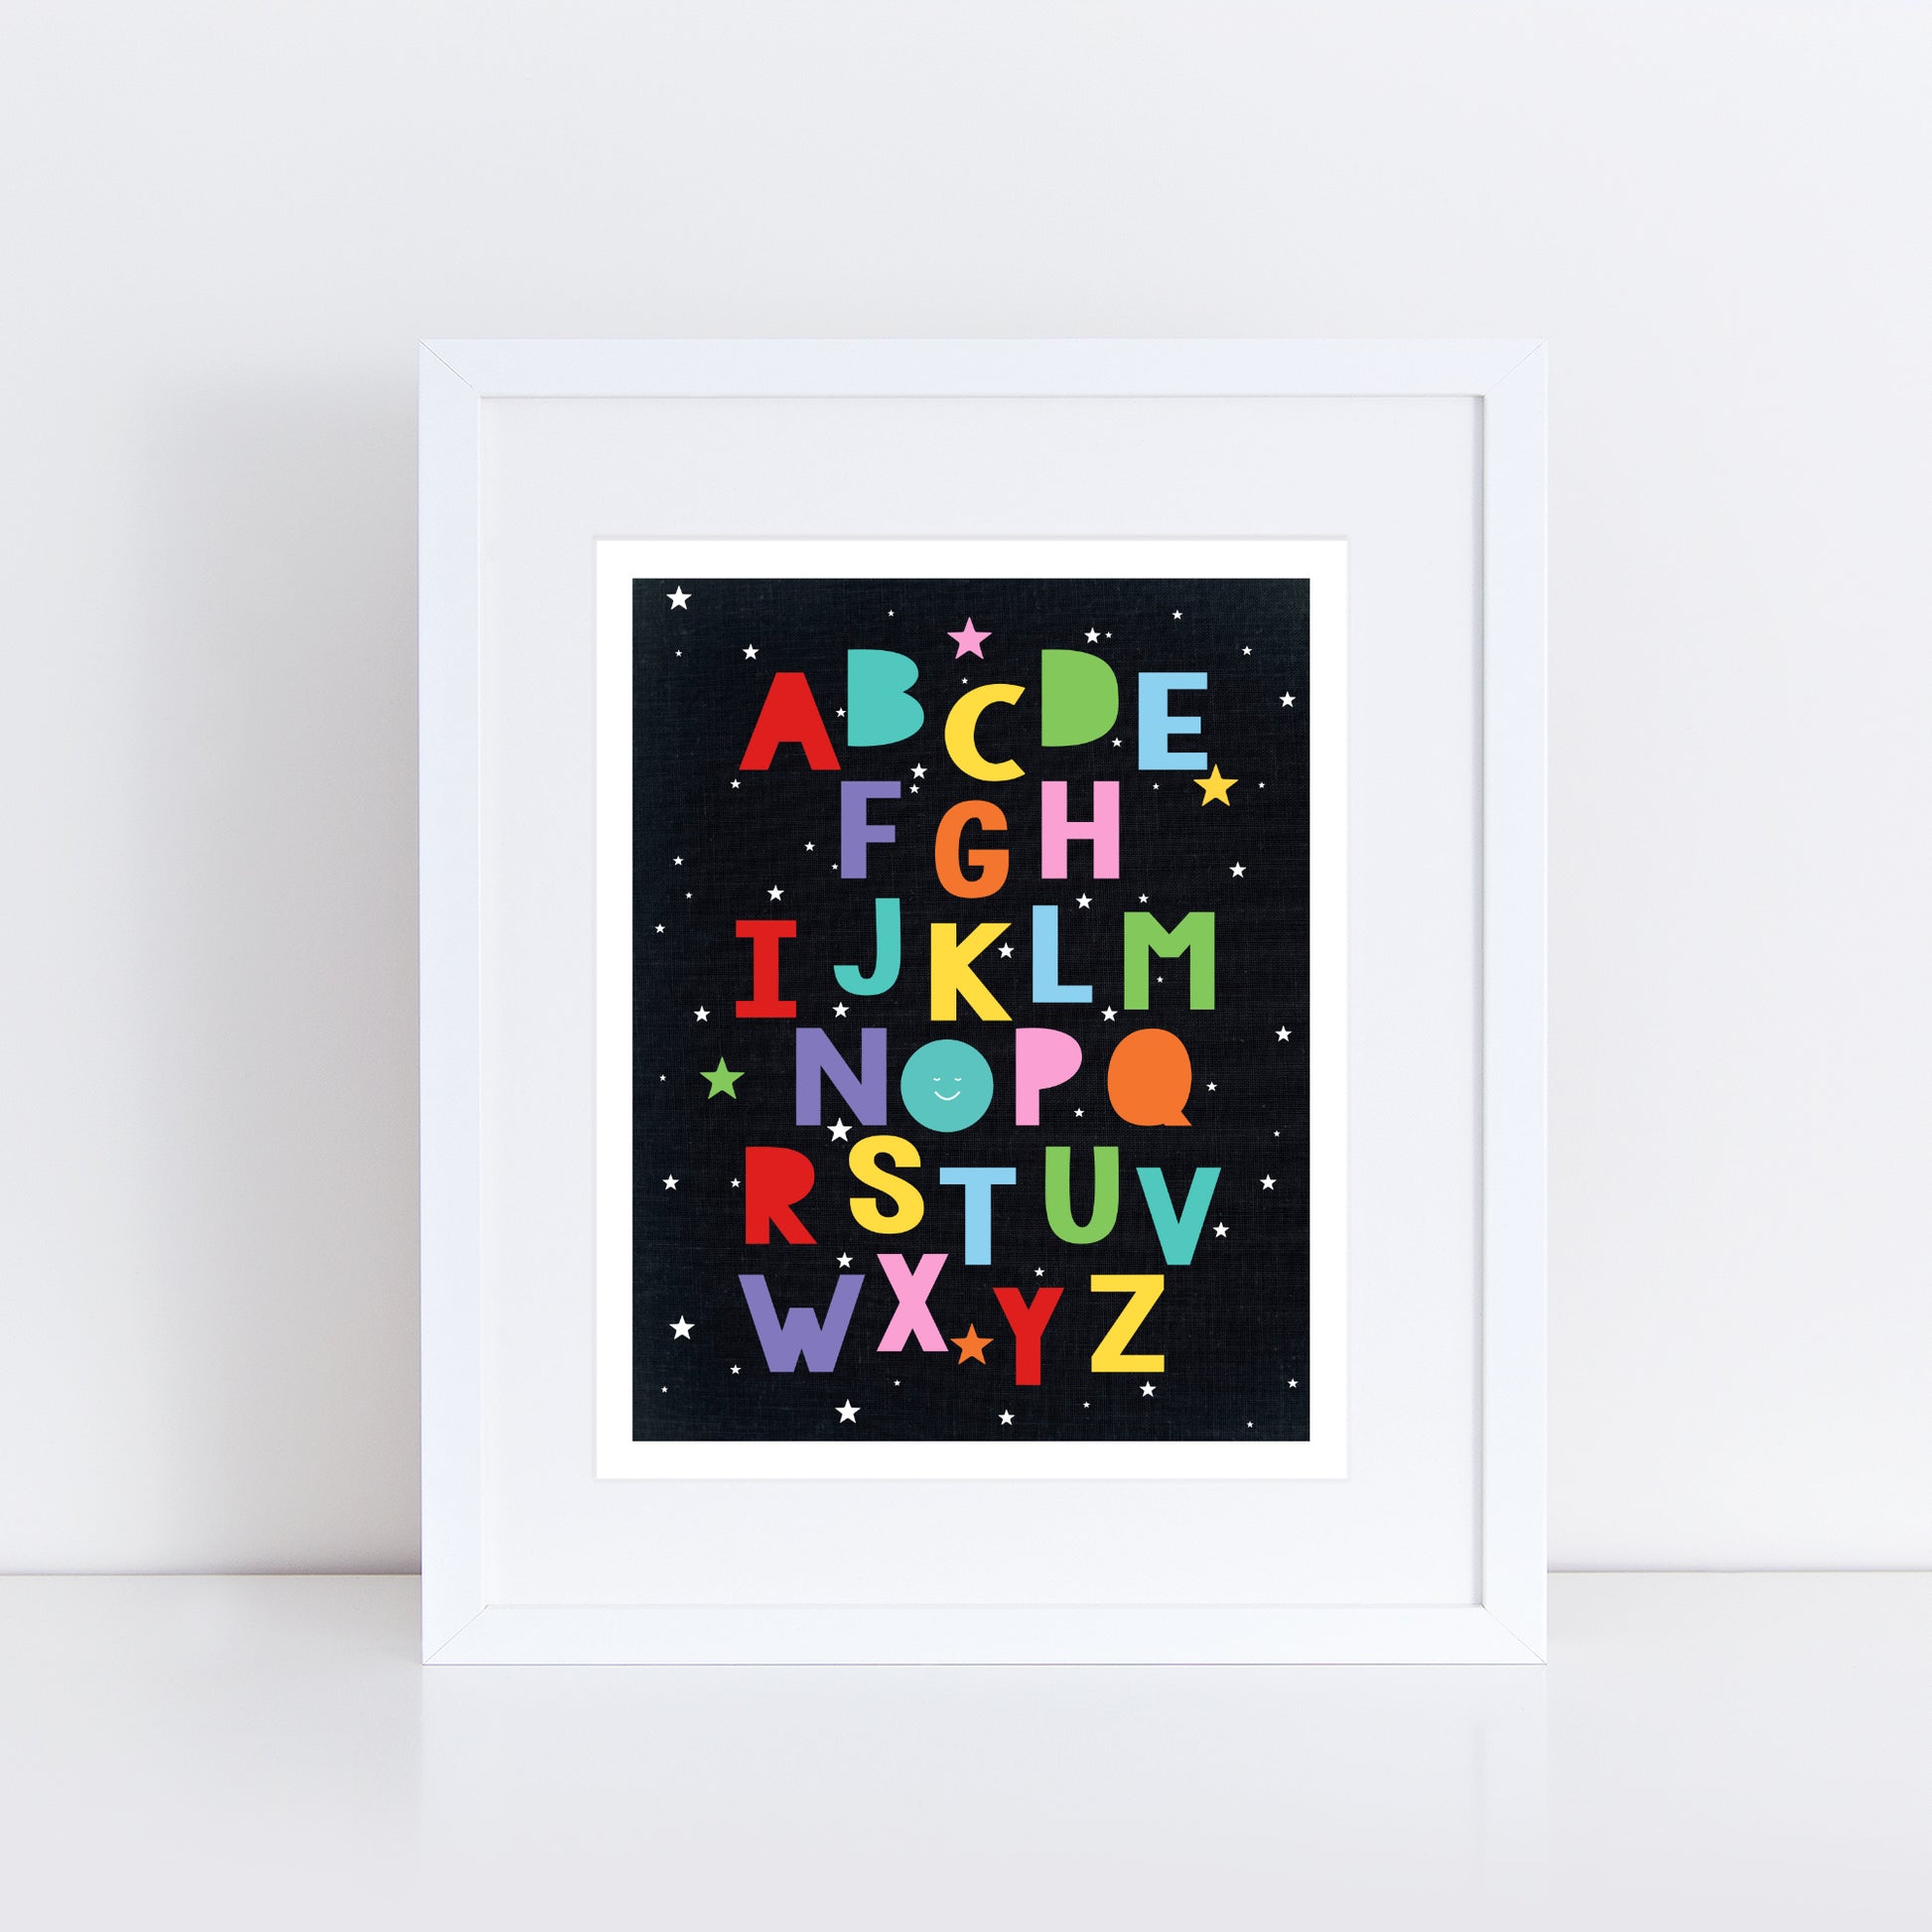 Print of colourful alphabet surrounded by stars in a frame